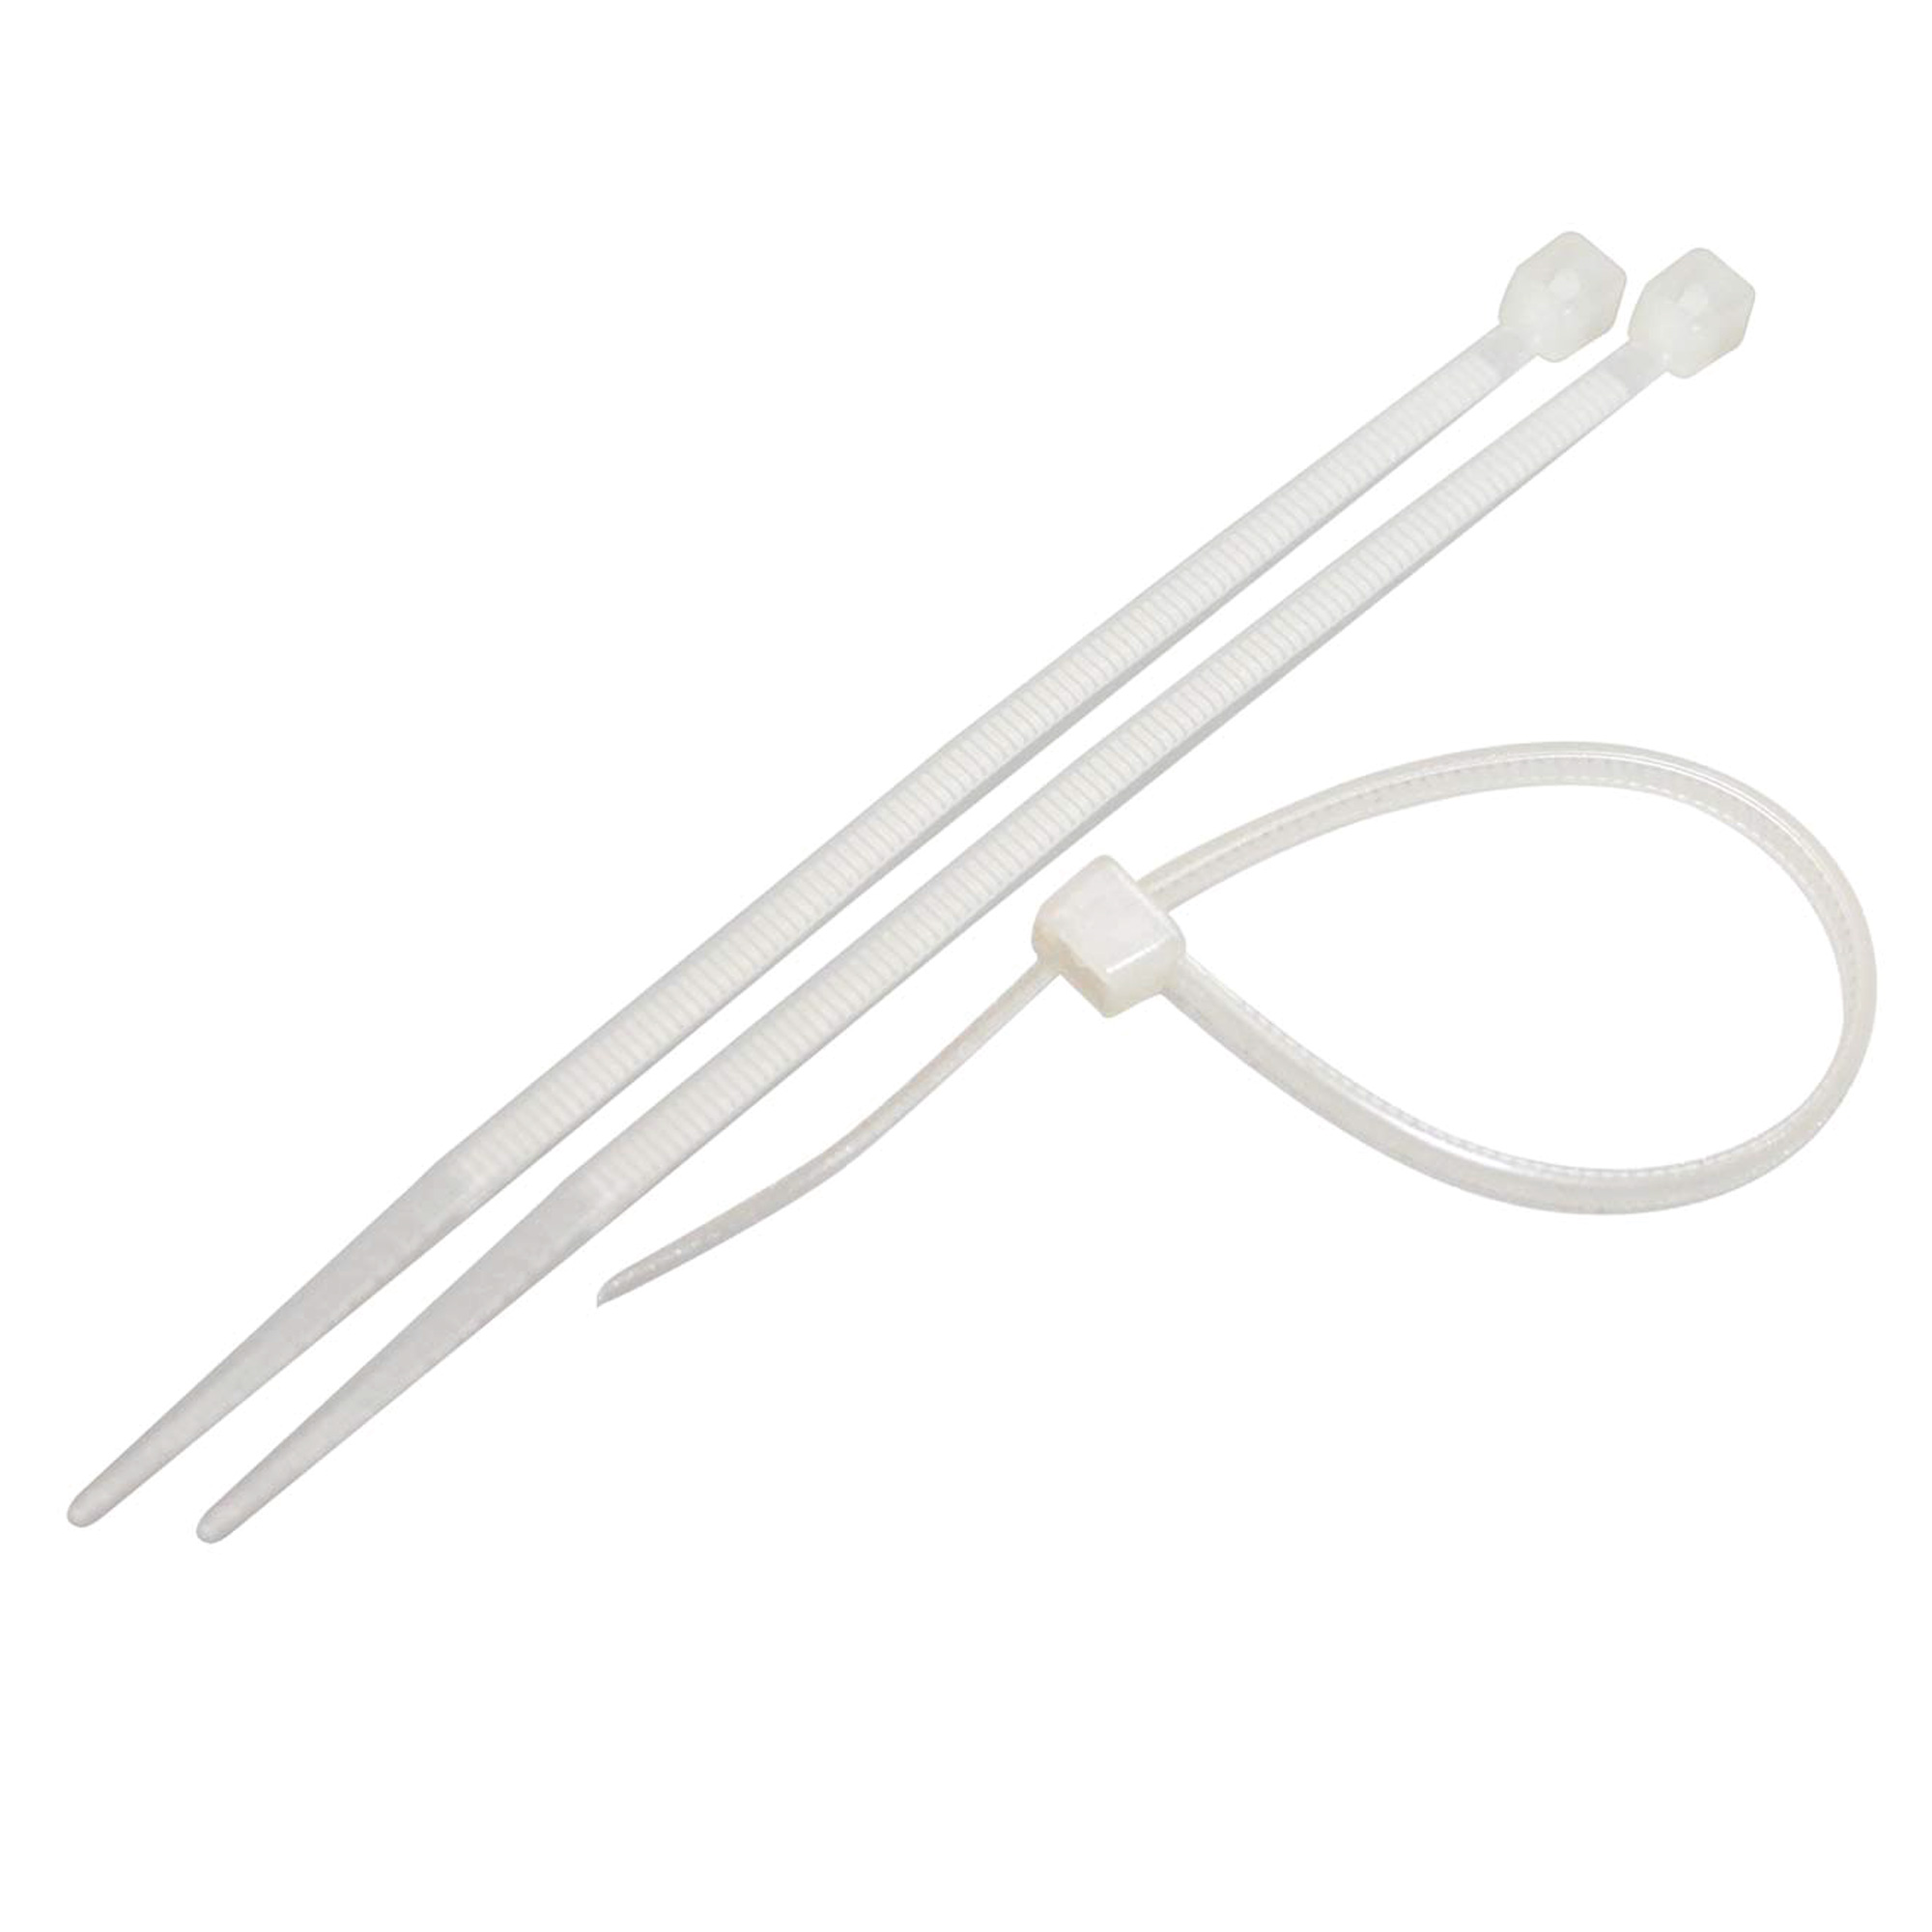 Cable Ties - ATEL